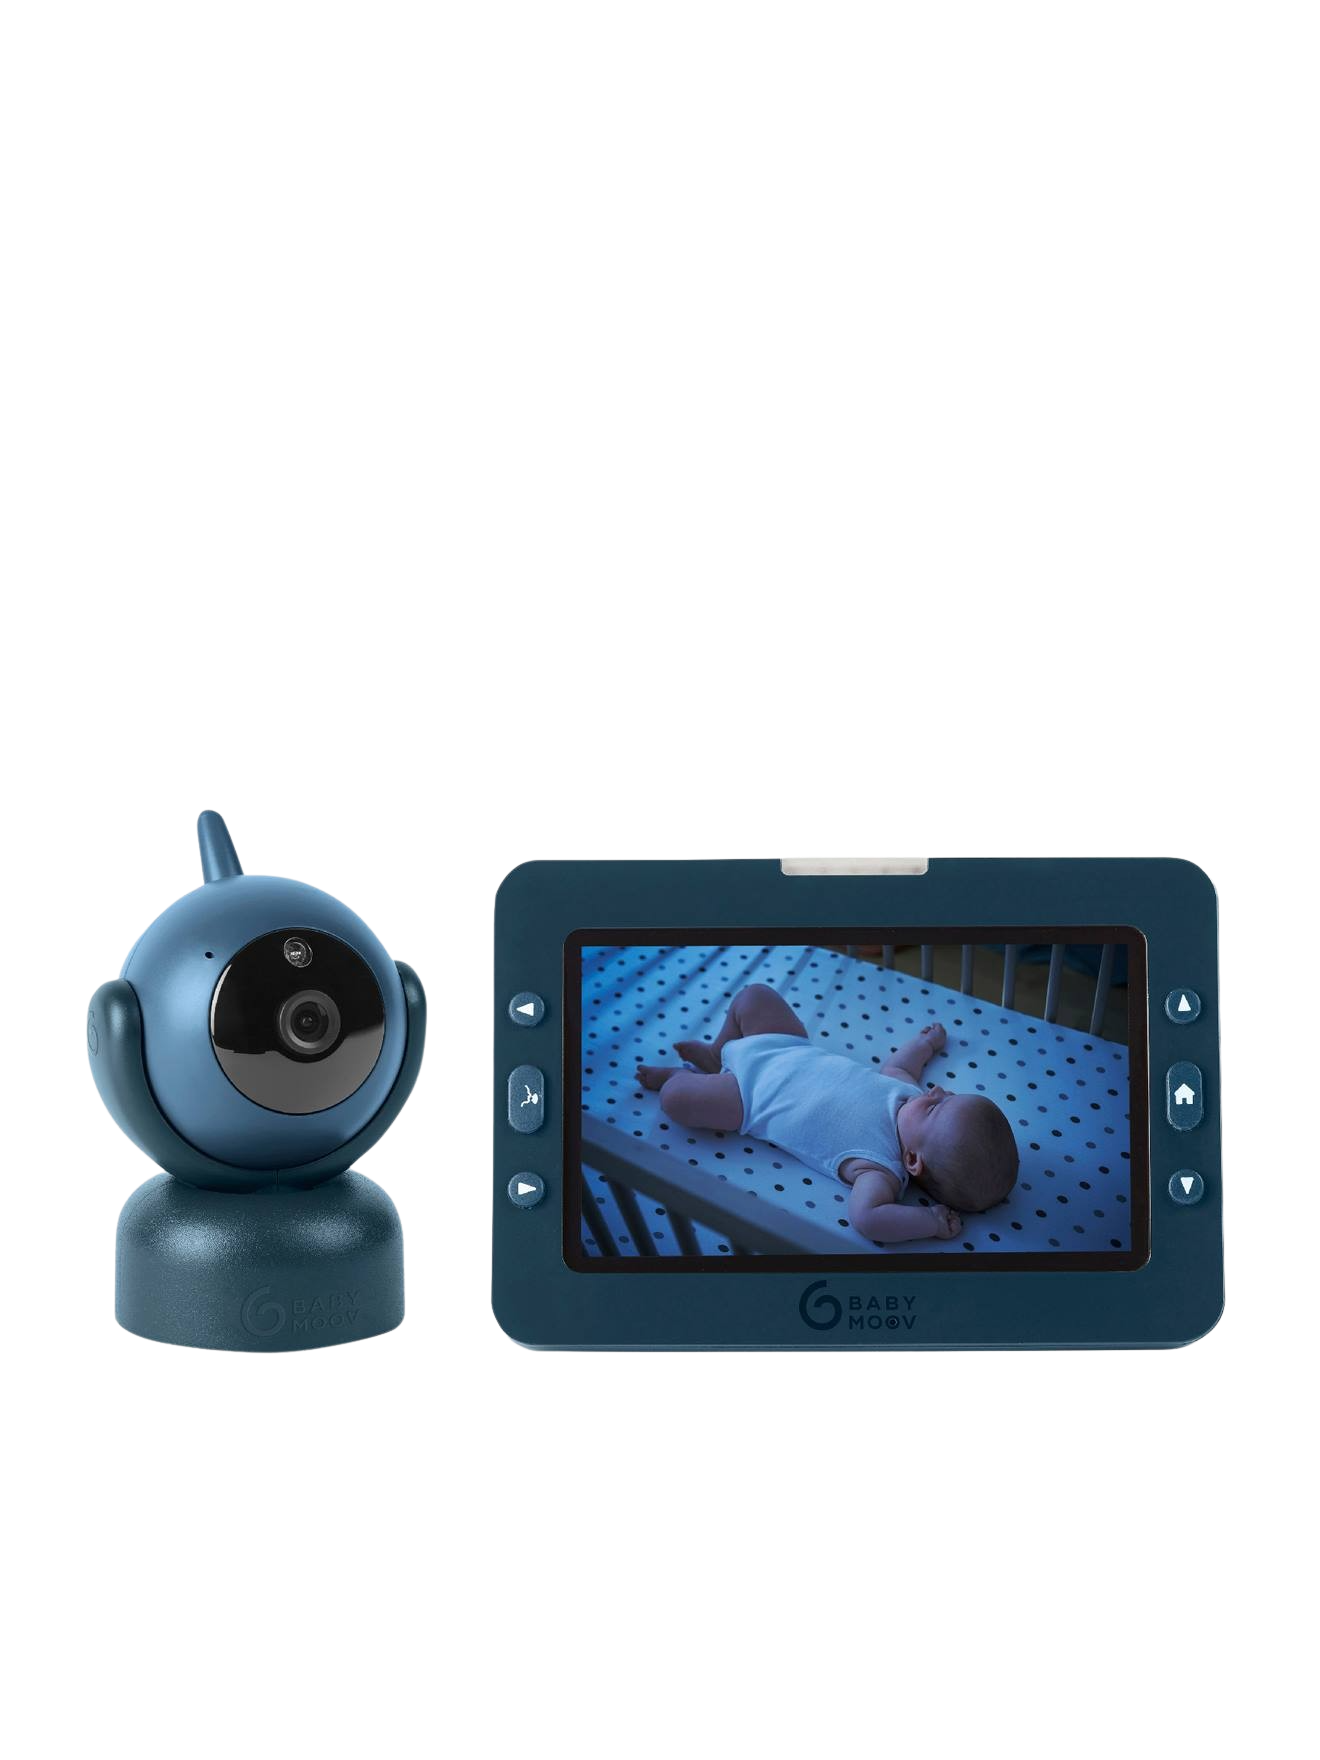 Rent Babymoov Babyphone Premium Care from €4.90 per month